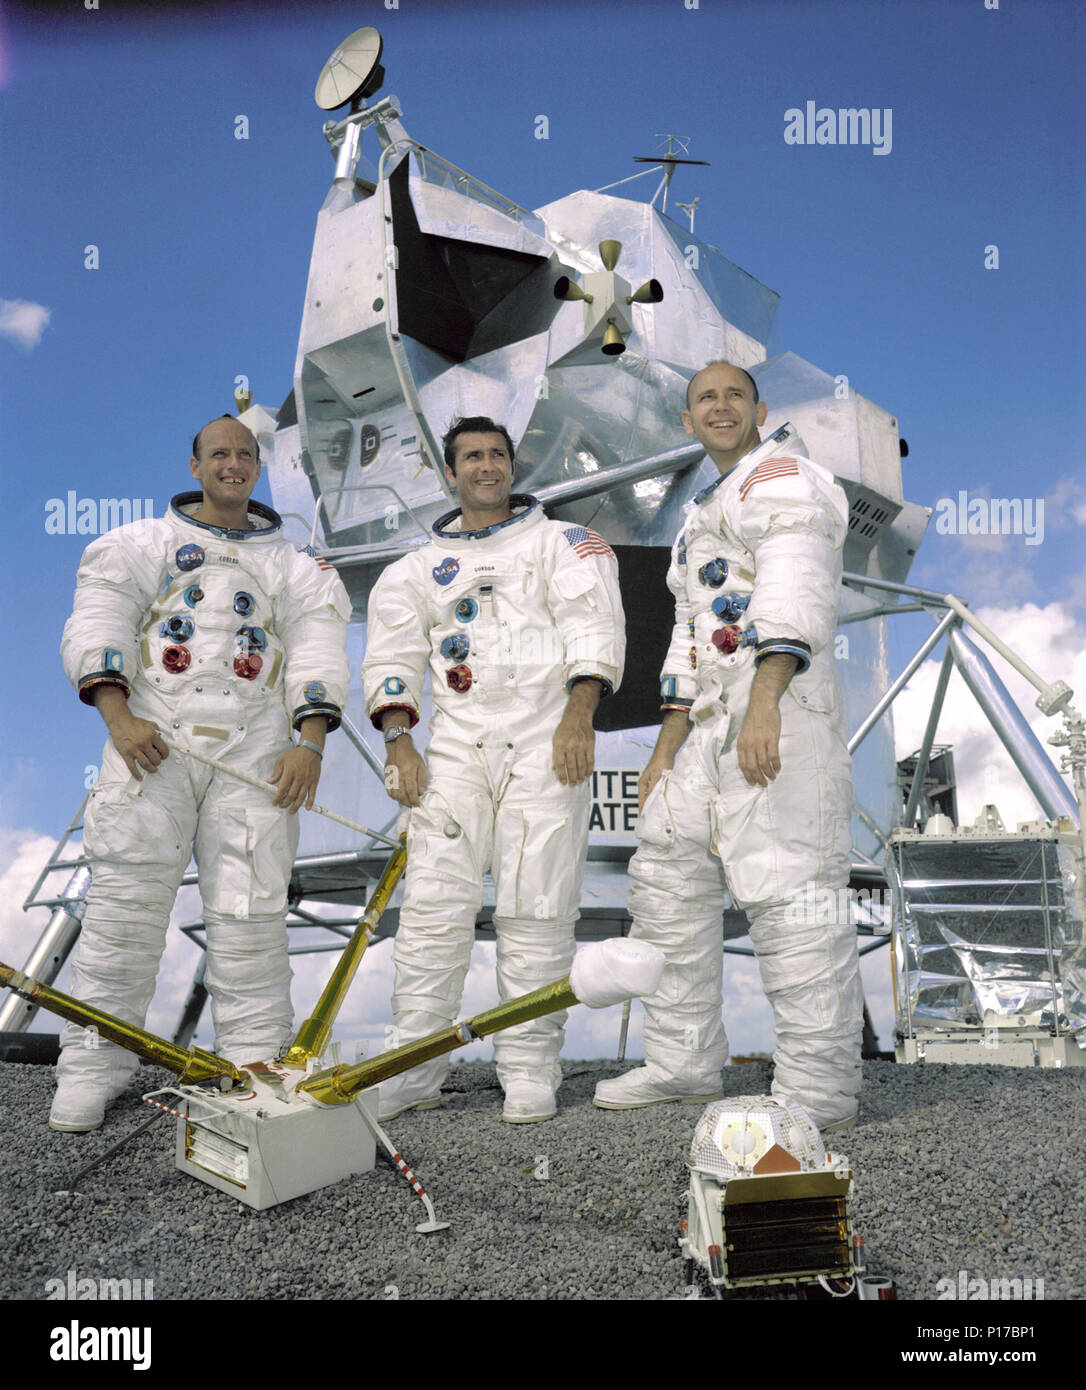 Portrait of the prime crew of the Apollo 12 lunar landing mission. From left to right they are: Commander, Charles 'Pete' Conrad Jr. Command Module pilot, Richard F. Gordon Jr. and Lunar Module pilot, Alan L.Bean. The Apollo 12 mission was the second lunar landing mission in which the third and fourth American astronauts set foot upon the Moon. This mission was highlighted by the Lunar Module nicknamed 'Intrepid' landing within a few hundred yards of a Surveyor probe which was sent to the Moon in April of 1967 on a mapping mission as a precursor to landing. Stock Photo